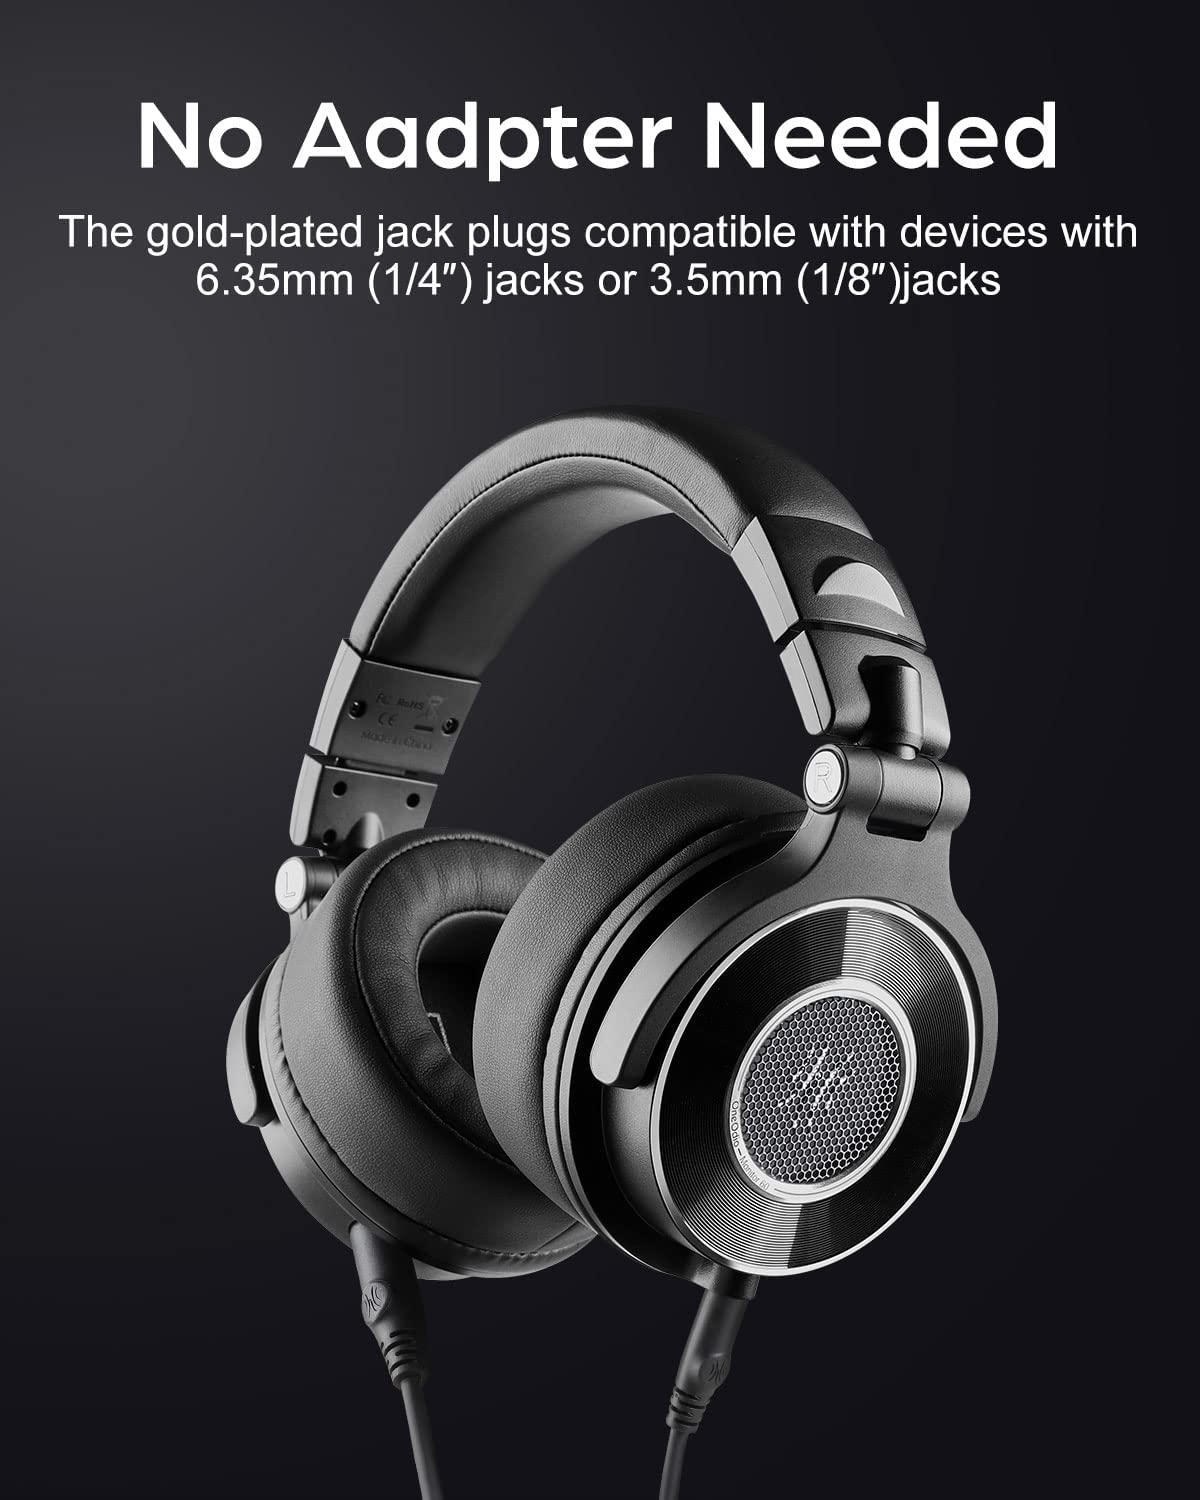 OneOdio Monitor 60 Wired Headphones